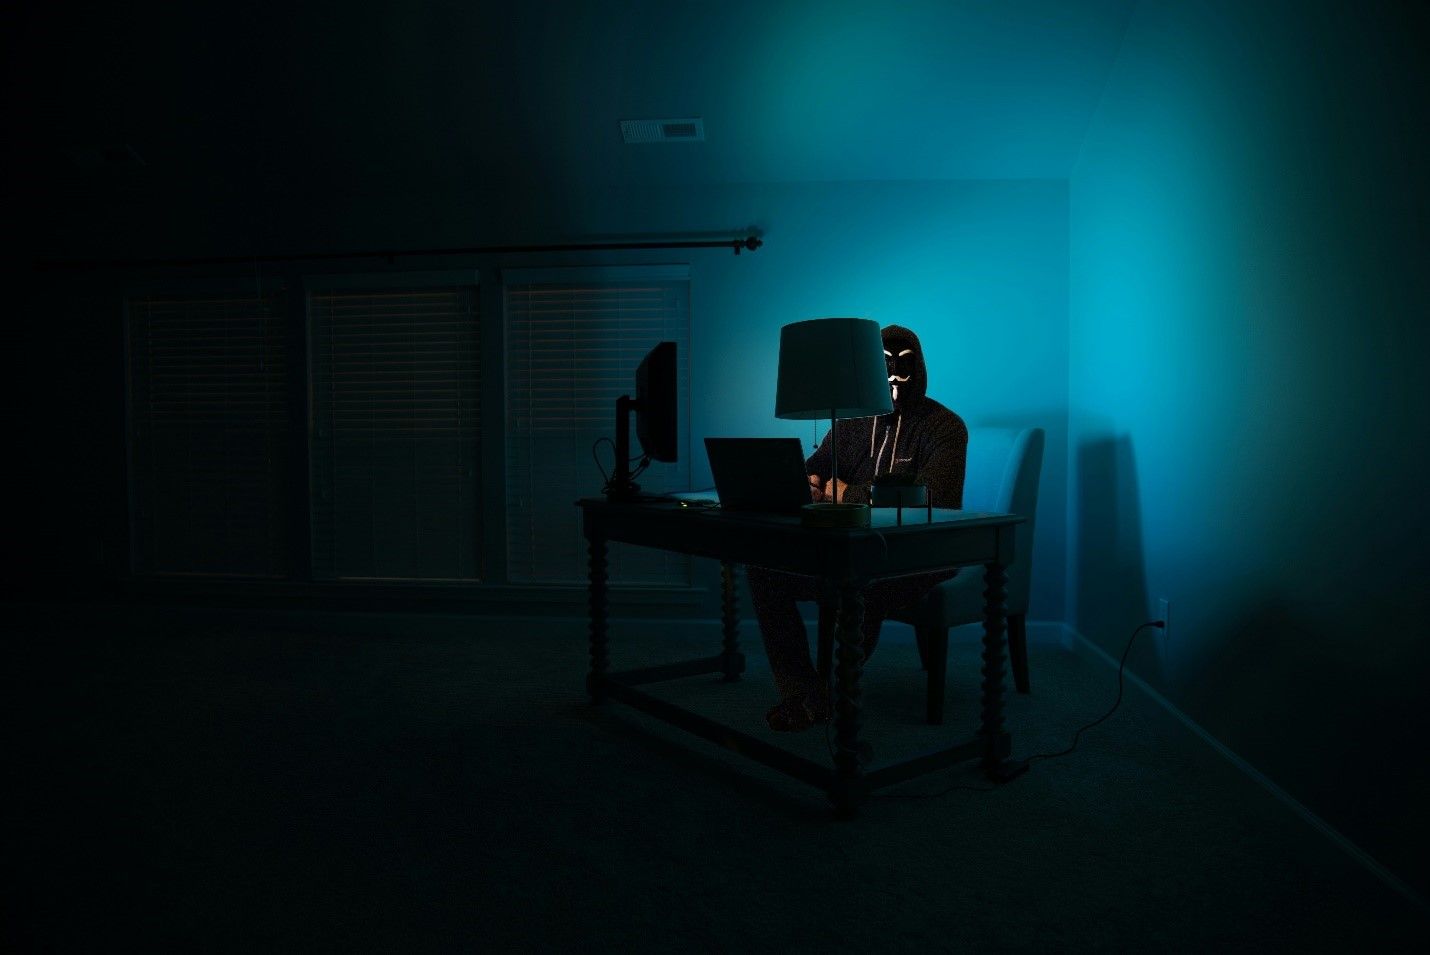 A man is sitting at a desk in a dark room using a laptop computer.